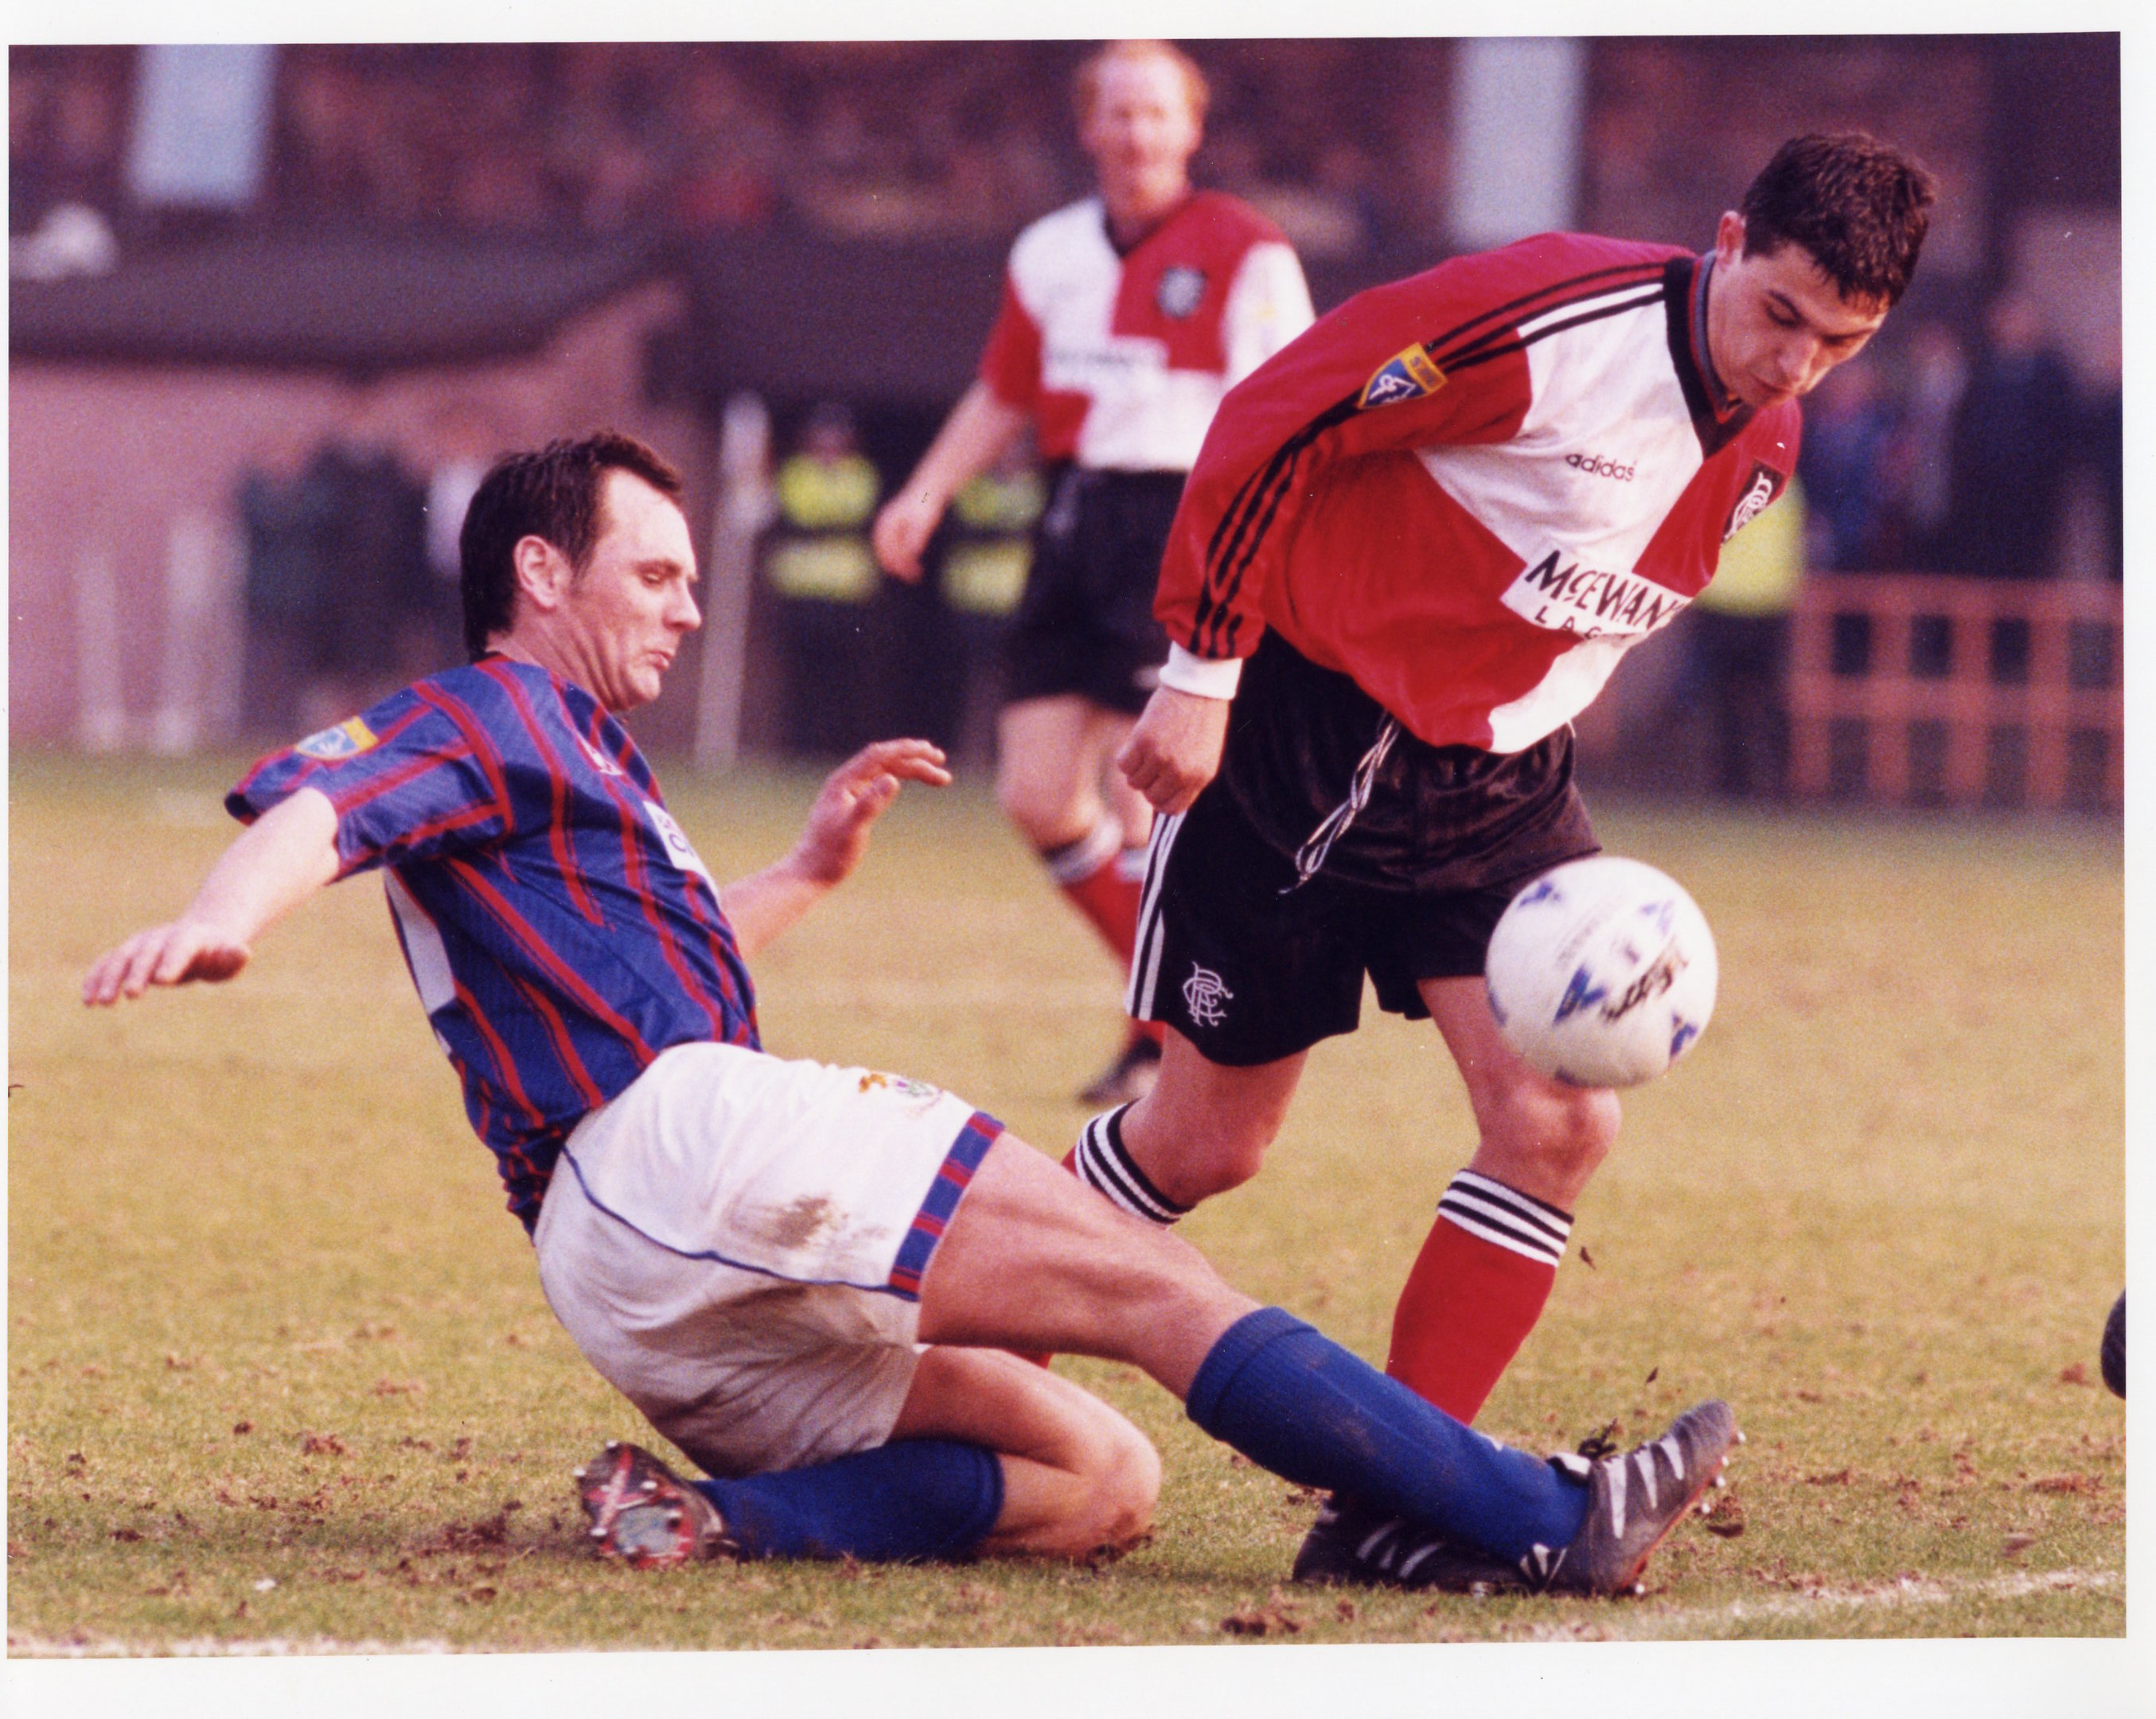 Alan Hercher in action for Caley Thistle against Rangers in 1996.